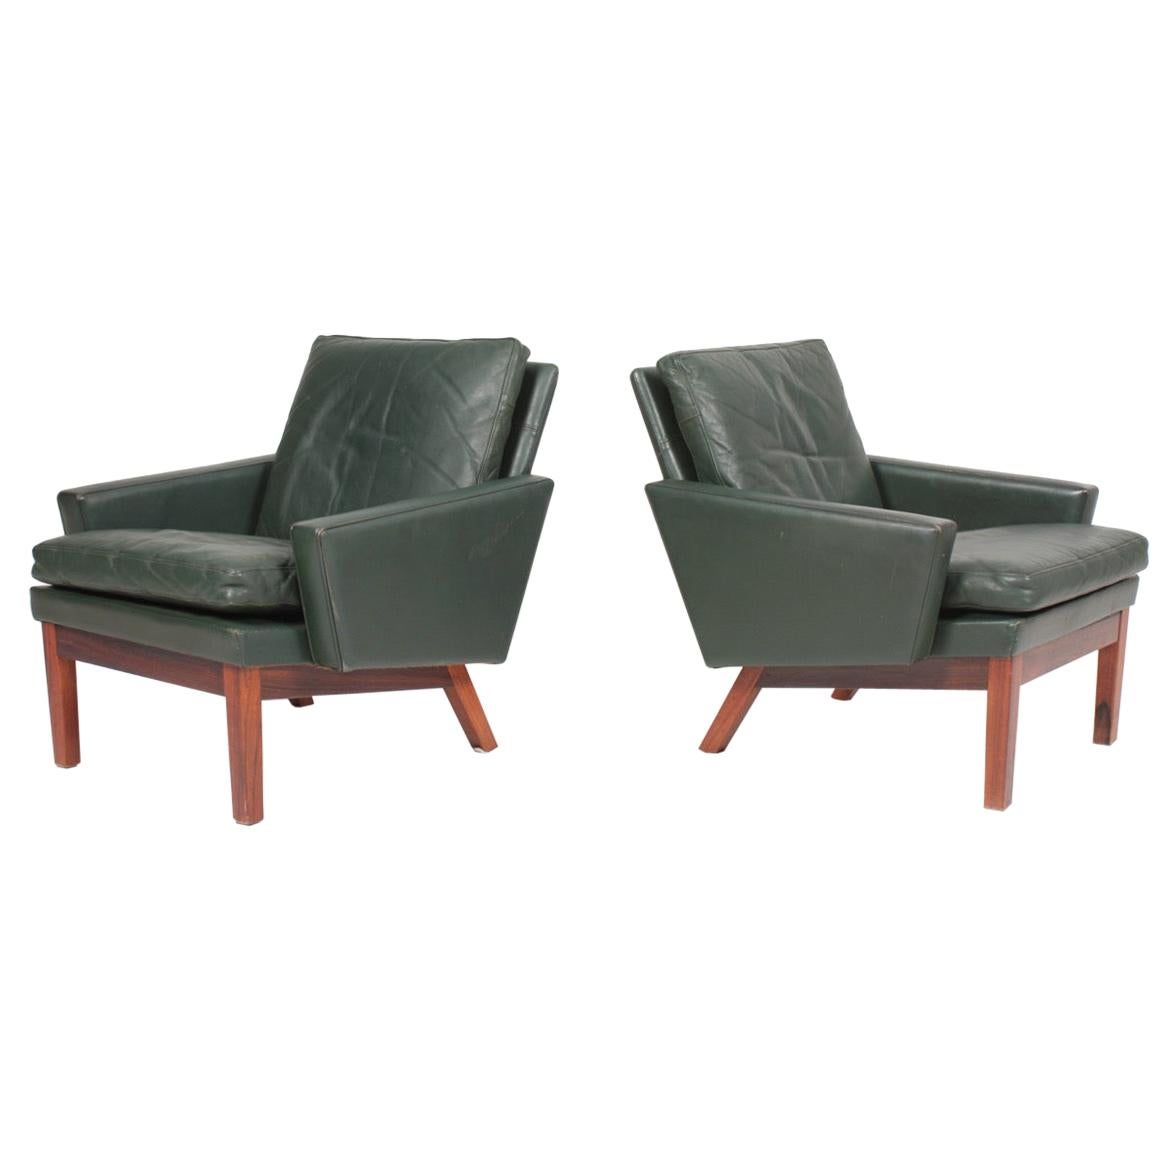 Pair of Danish Midcentury Lounge Chairs in Patinated Leather, 1960s